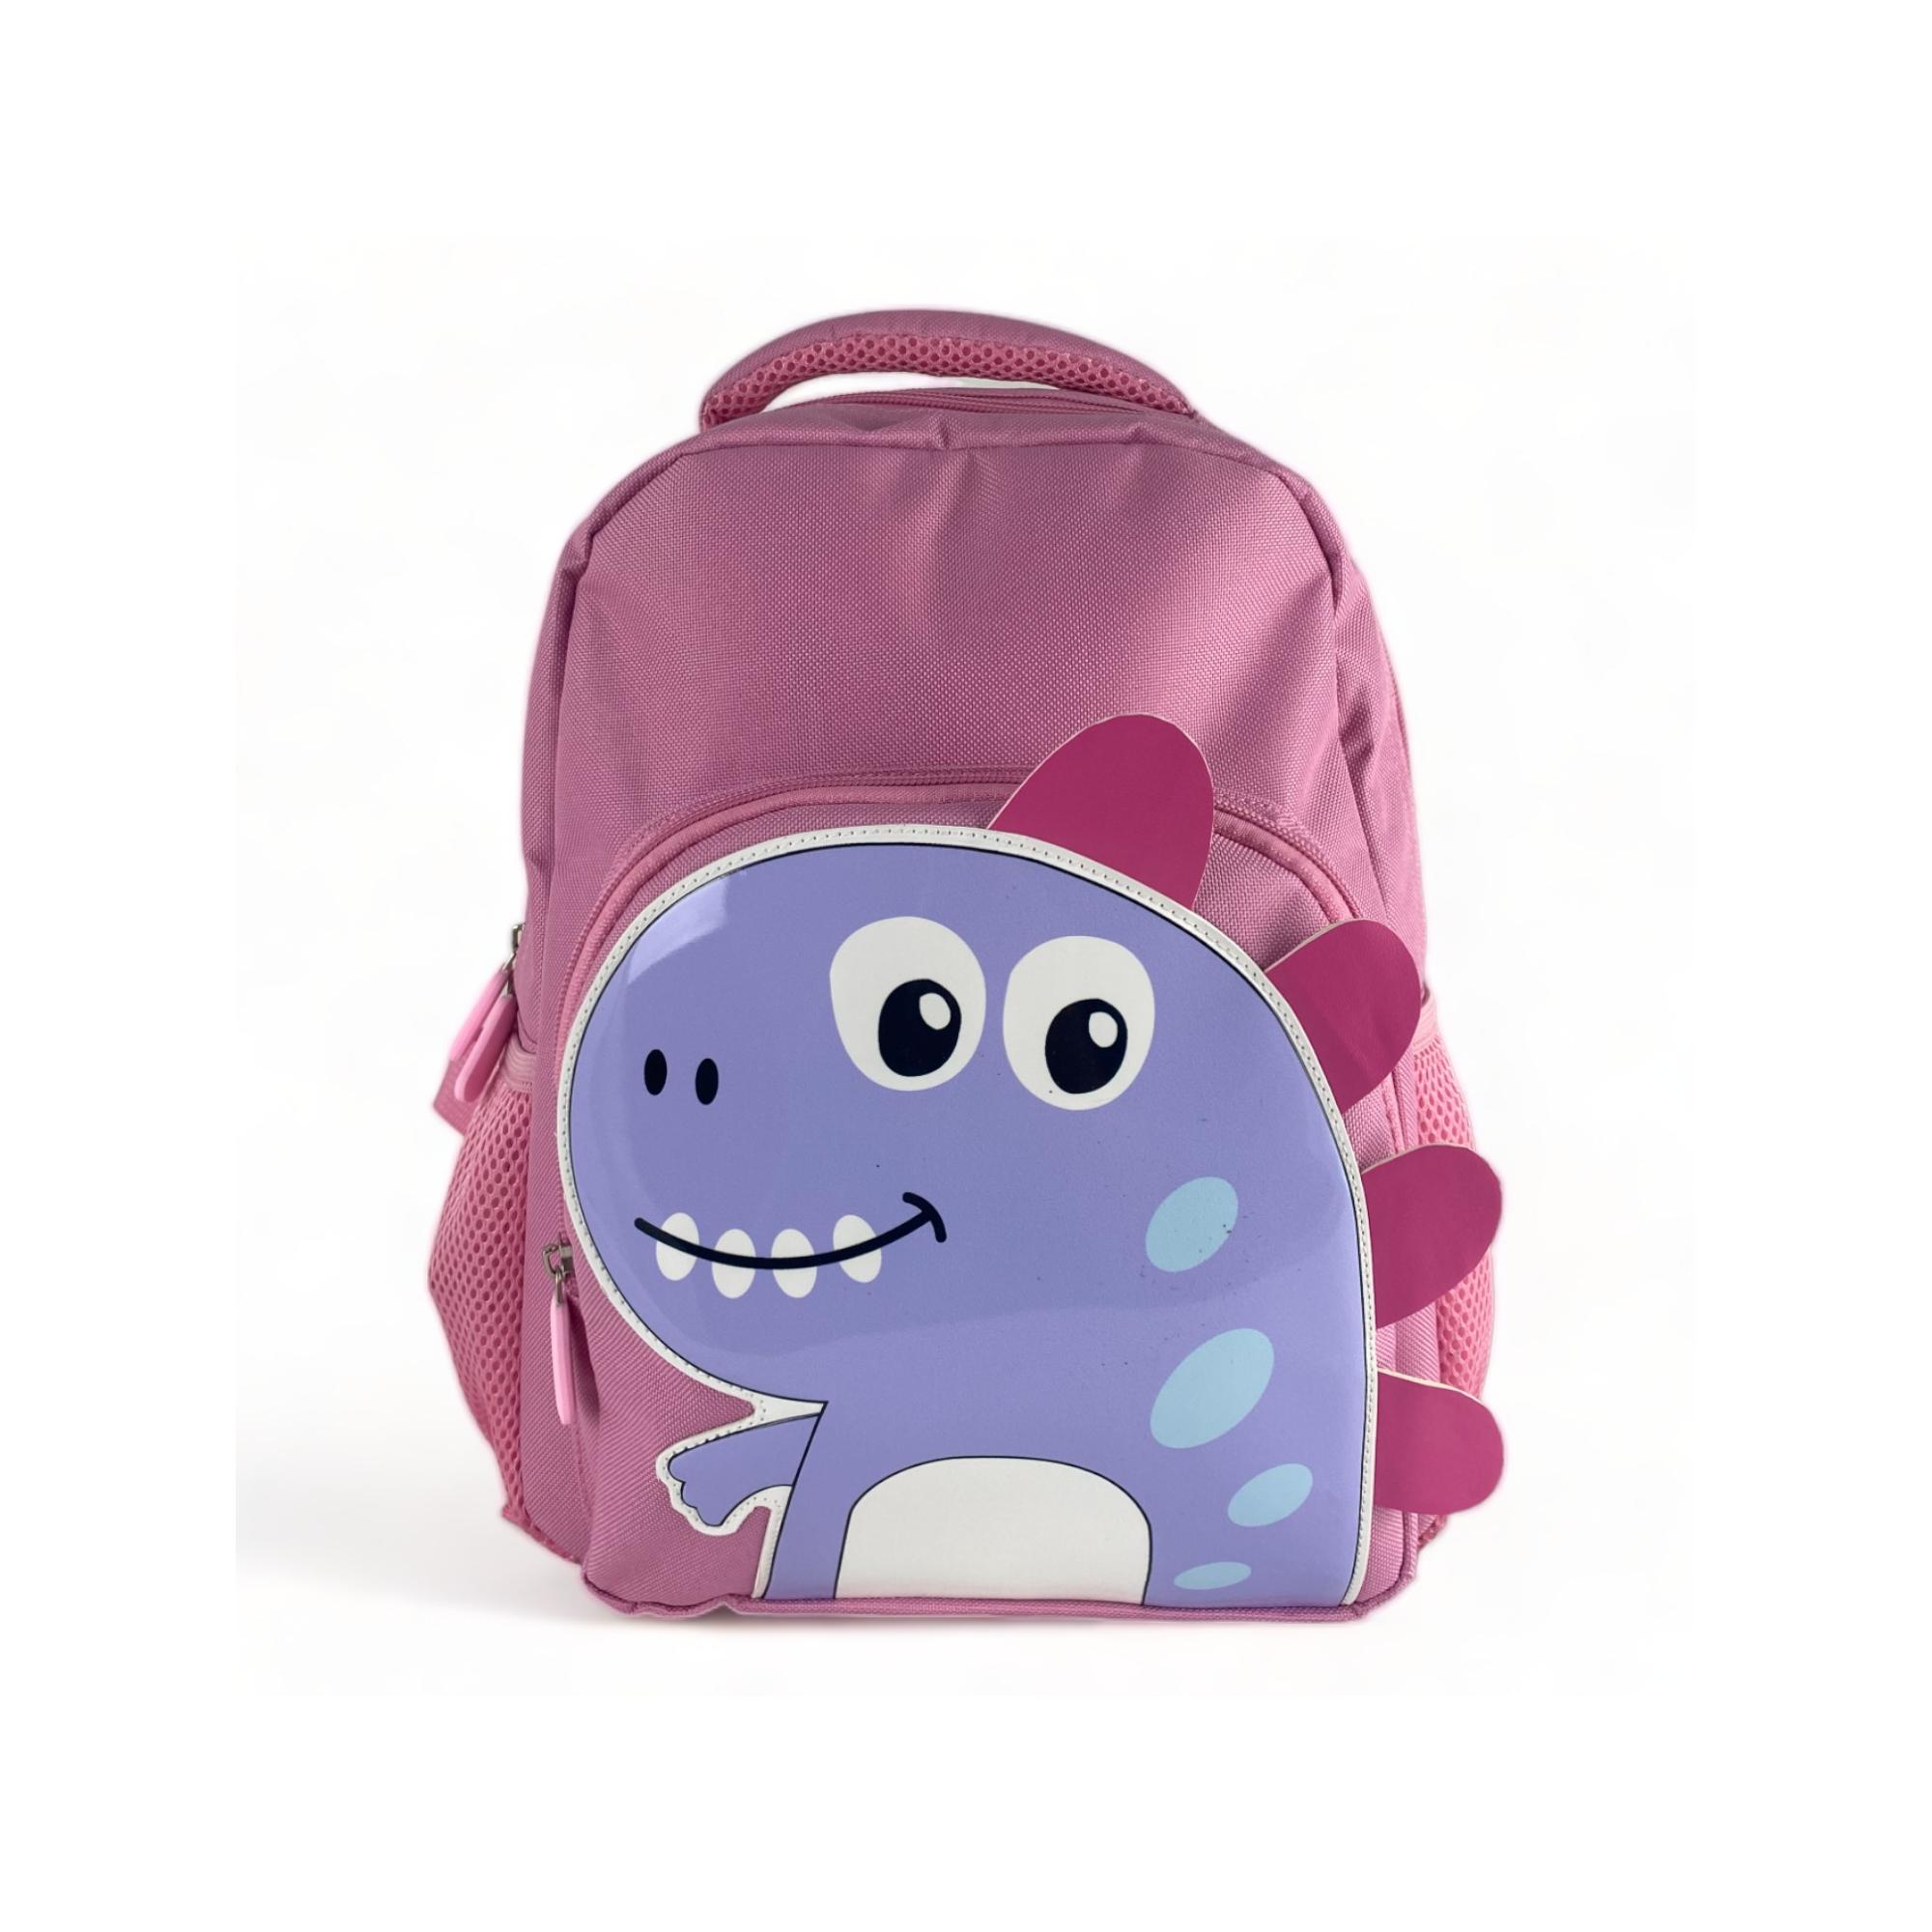 CHILDREN'S BACKPACK WITH 3D DESIGN - 780-3082307